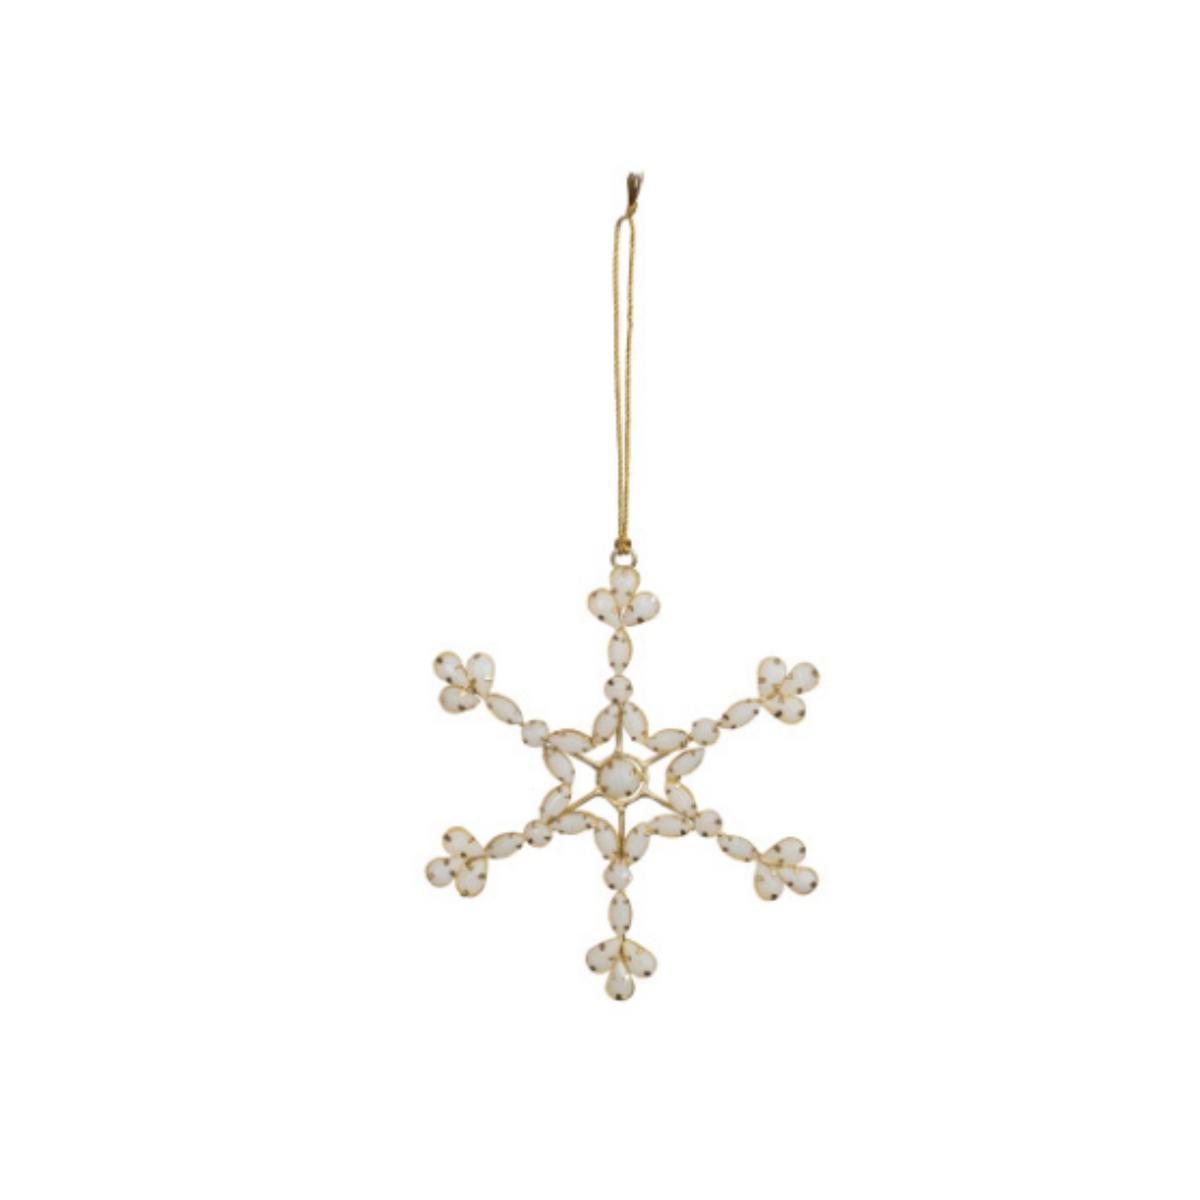 Metal and Acrylic Jewel Ornament, Opaque Cream Color and Gold Finish